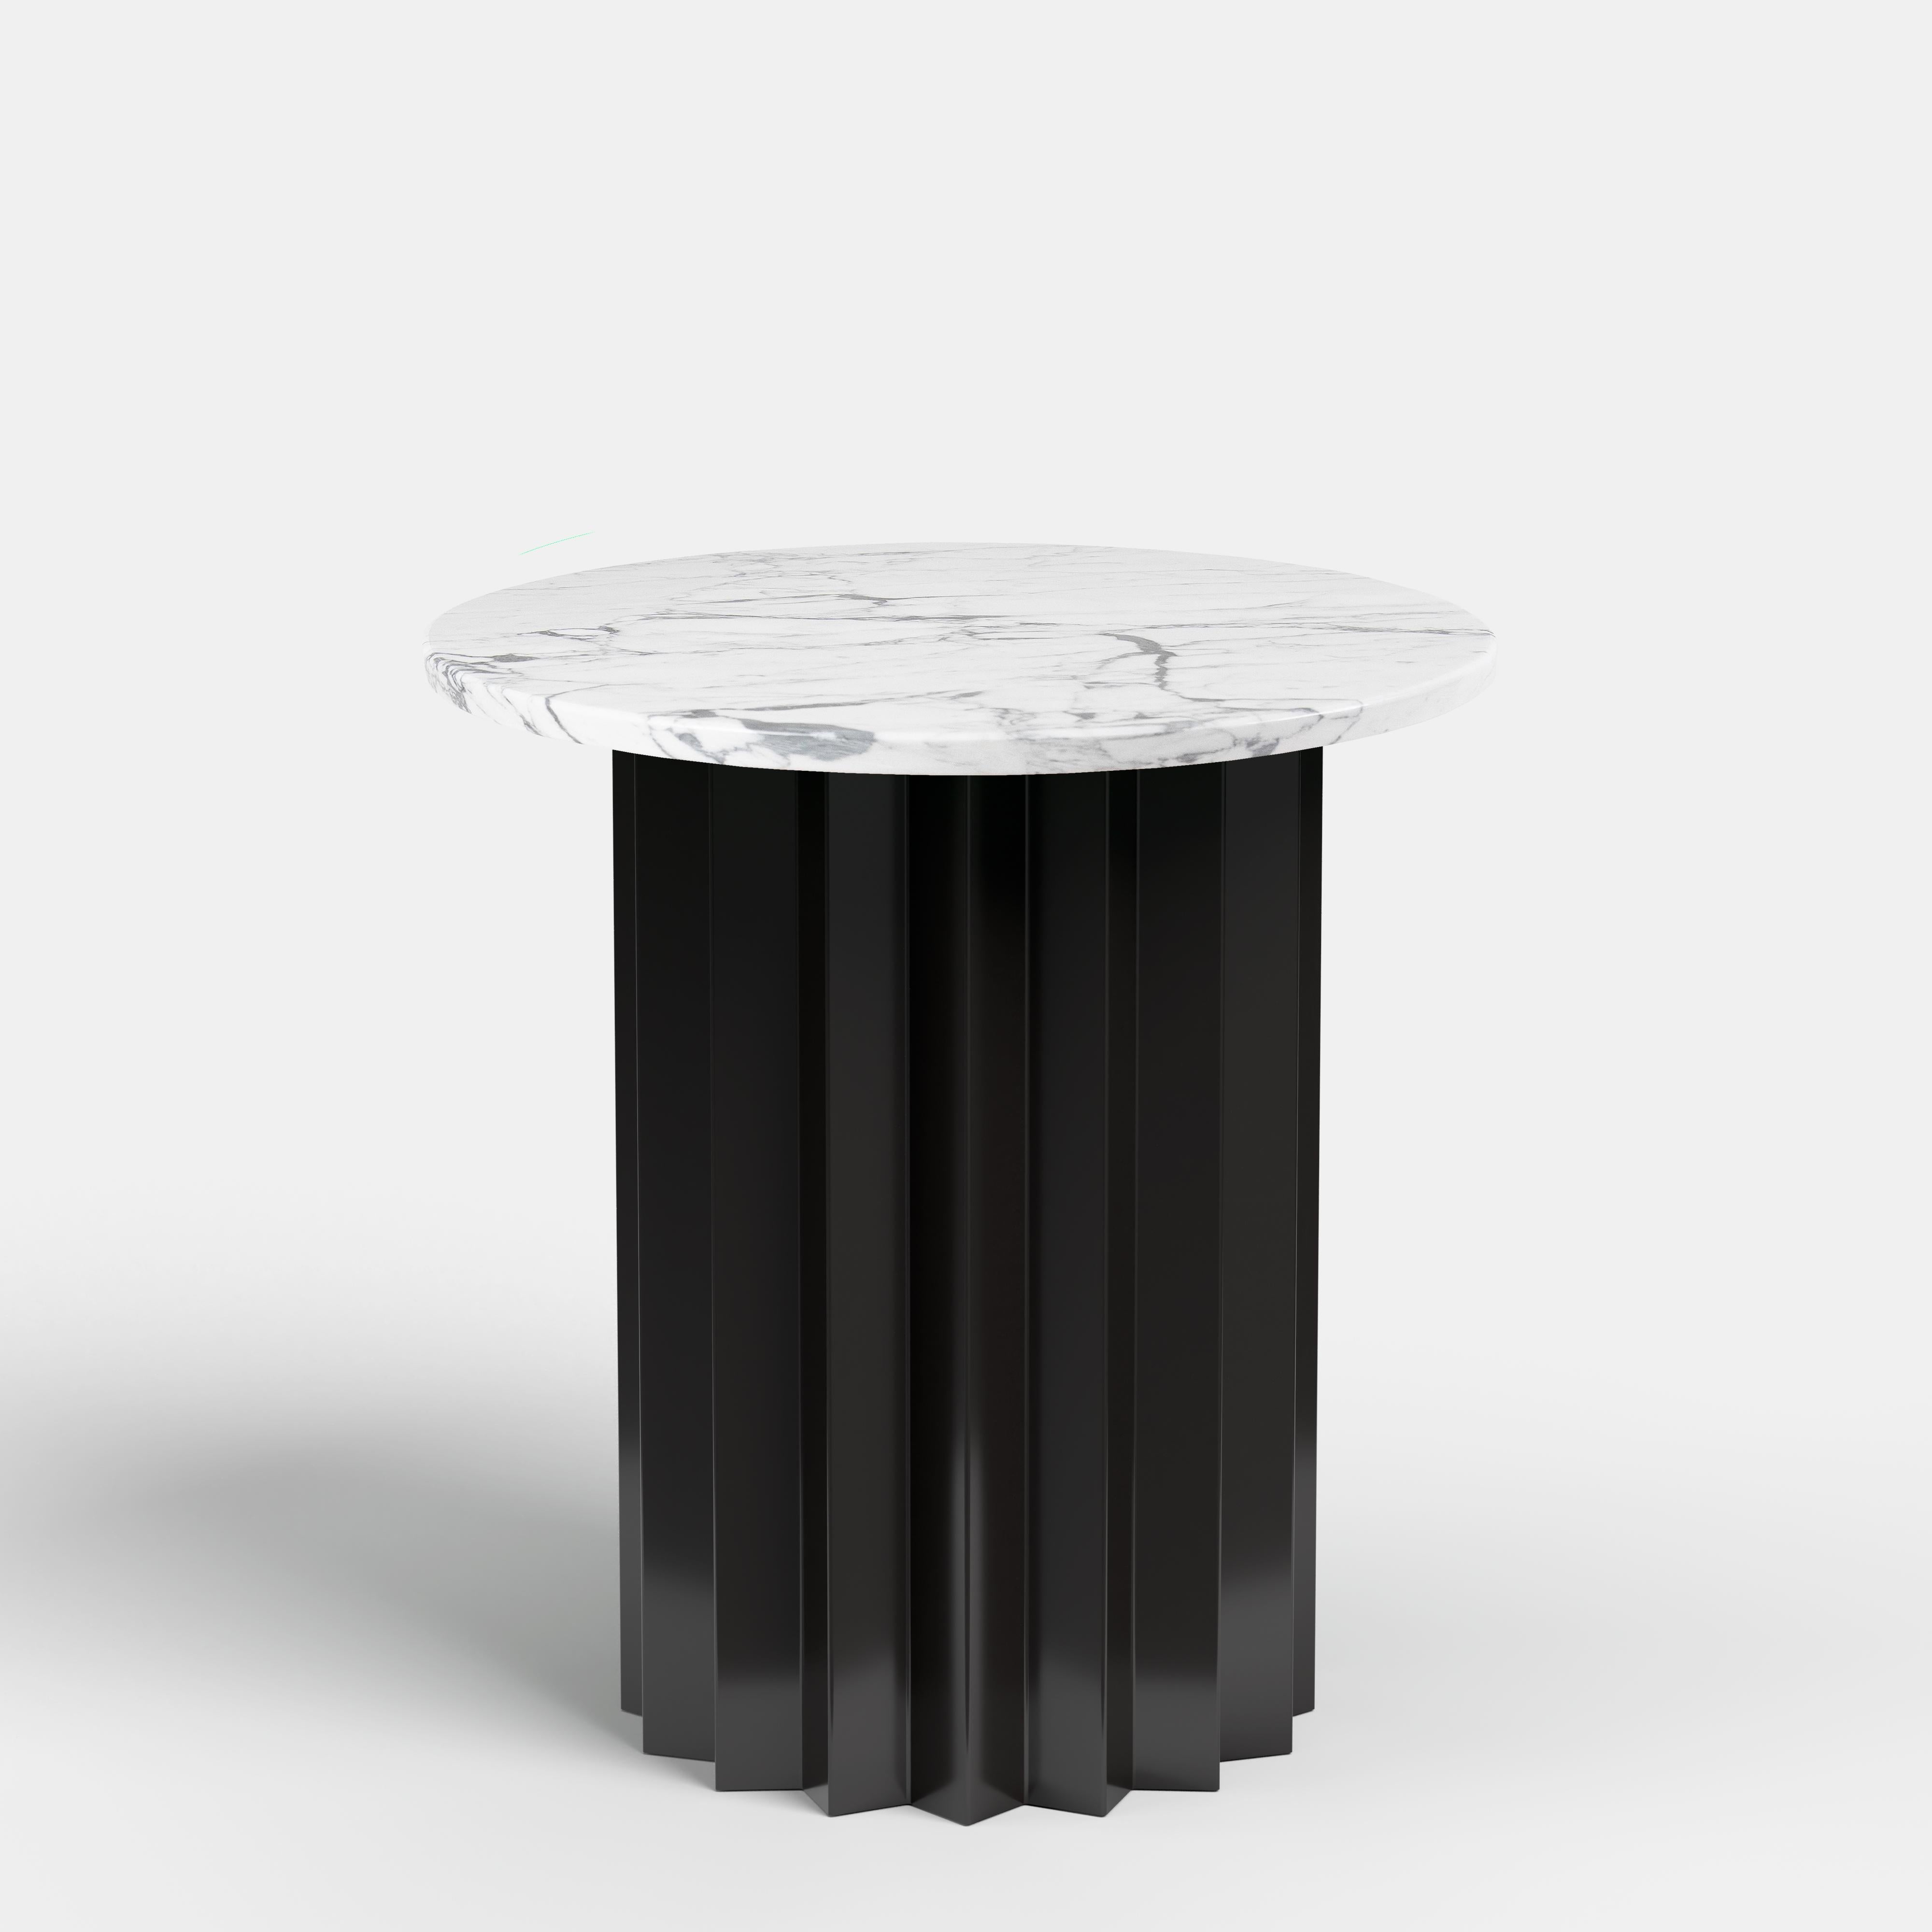 Turkish Contemporary Modern, Volume High Side Table, Metal Base & Carrara Marble Top For Sale